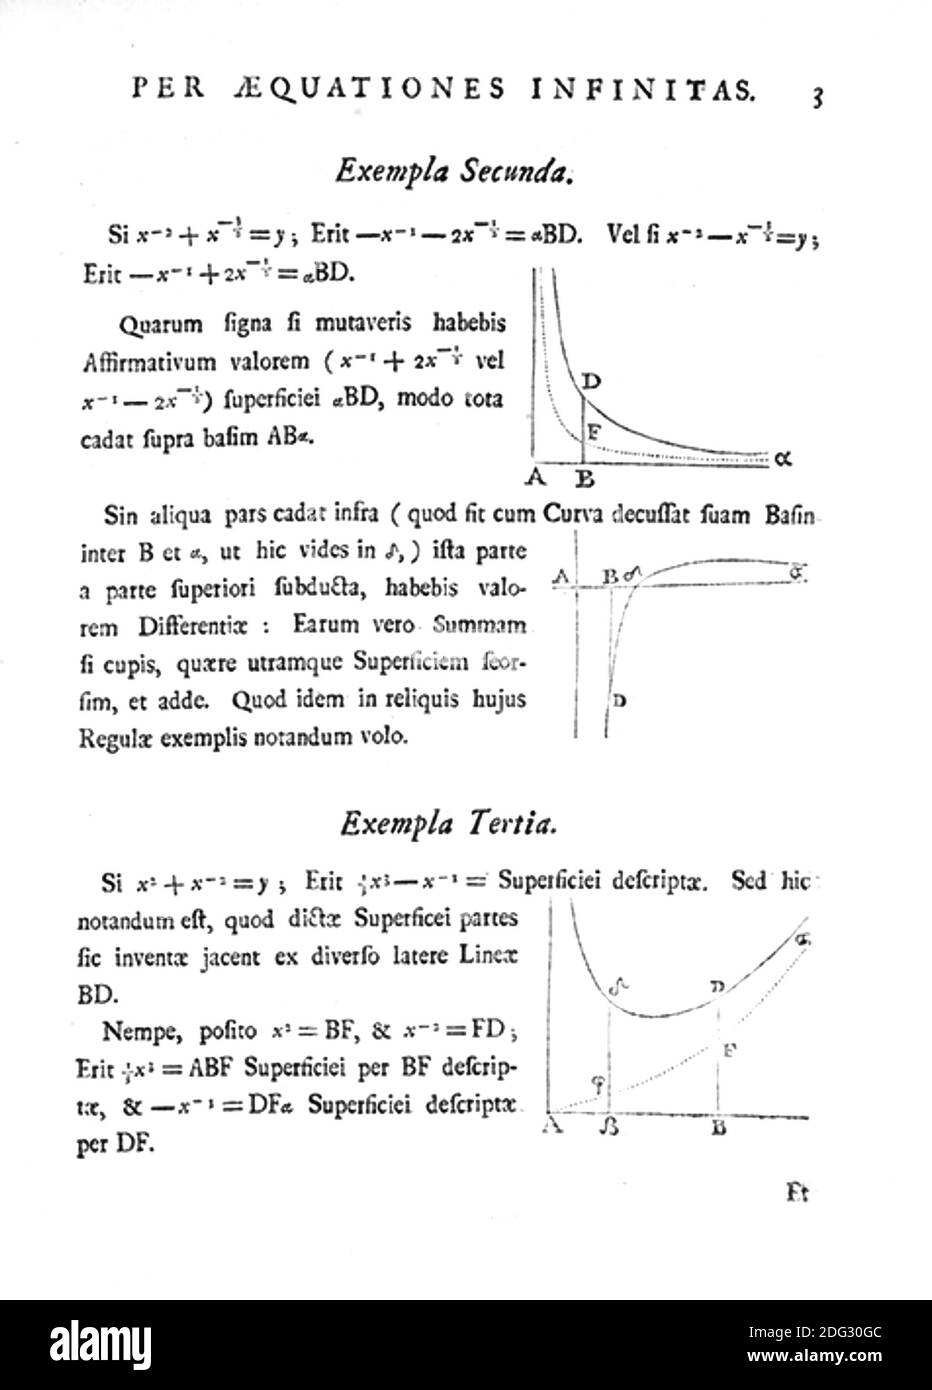 ISAAC NEWTON (1642-1726/7) English mathematician, physicist, theologian, and author. Page from his 1711 work on calculus, De analysi per aequationes... Stock Photo